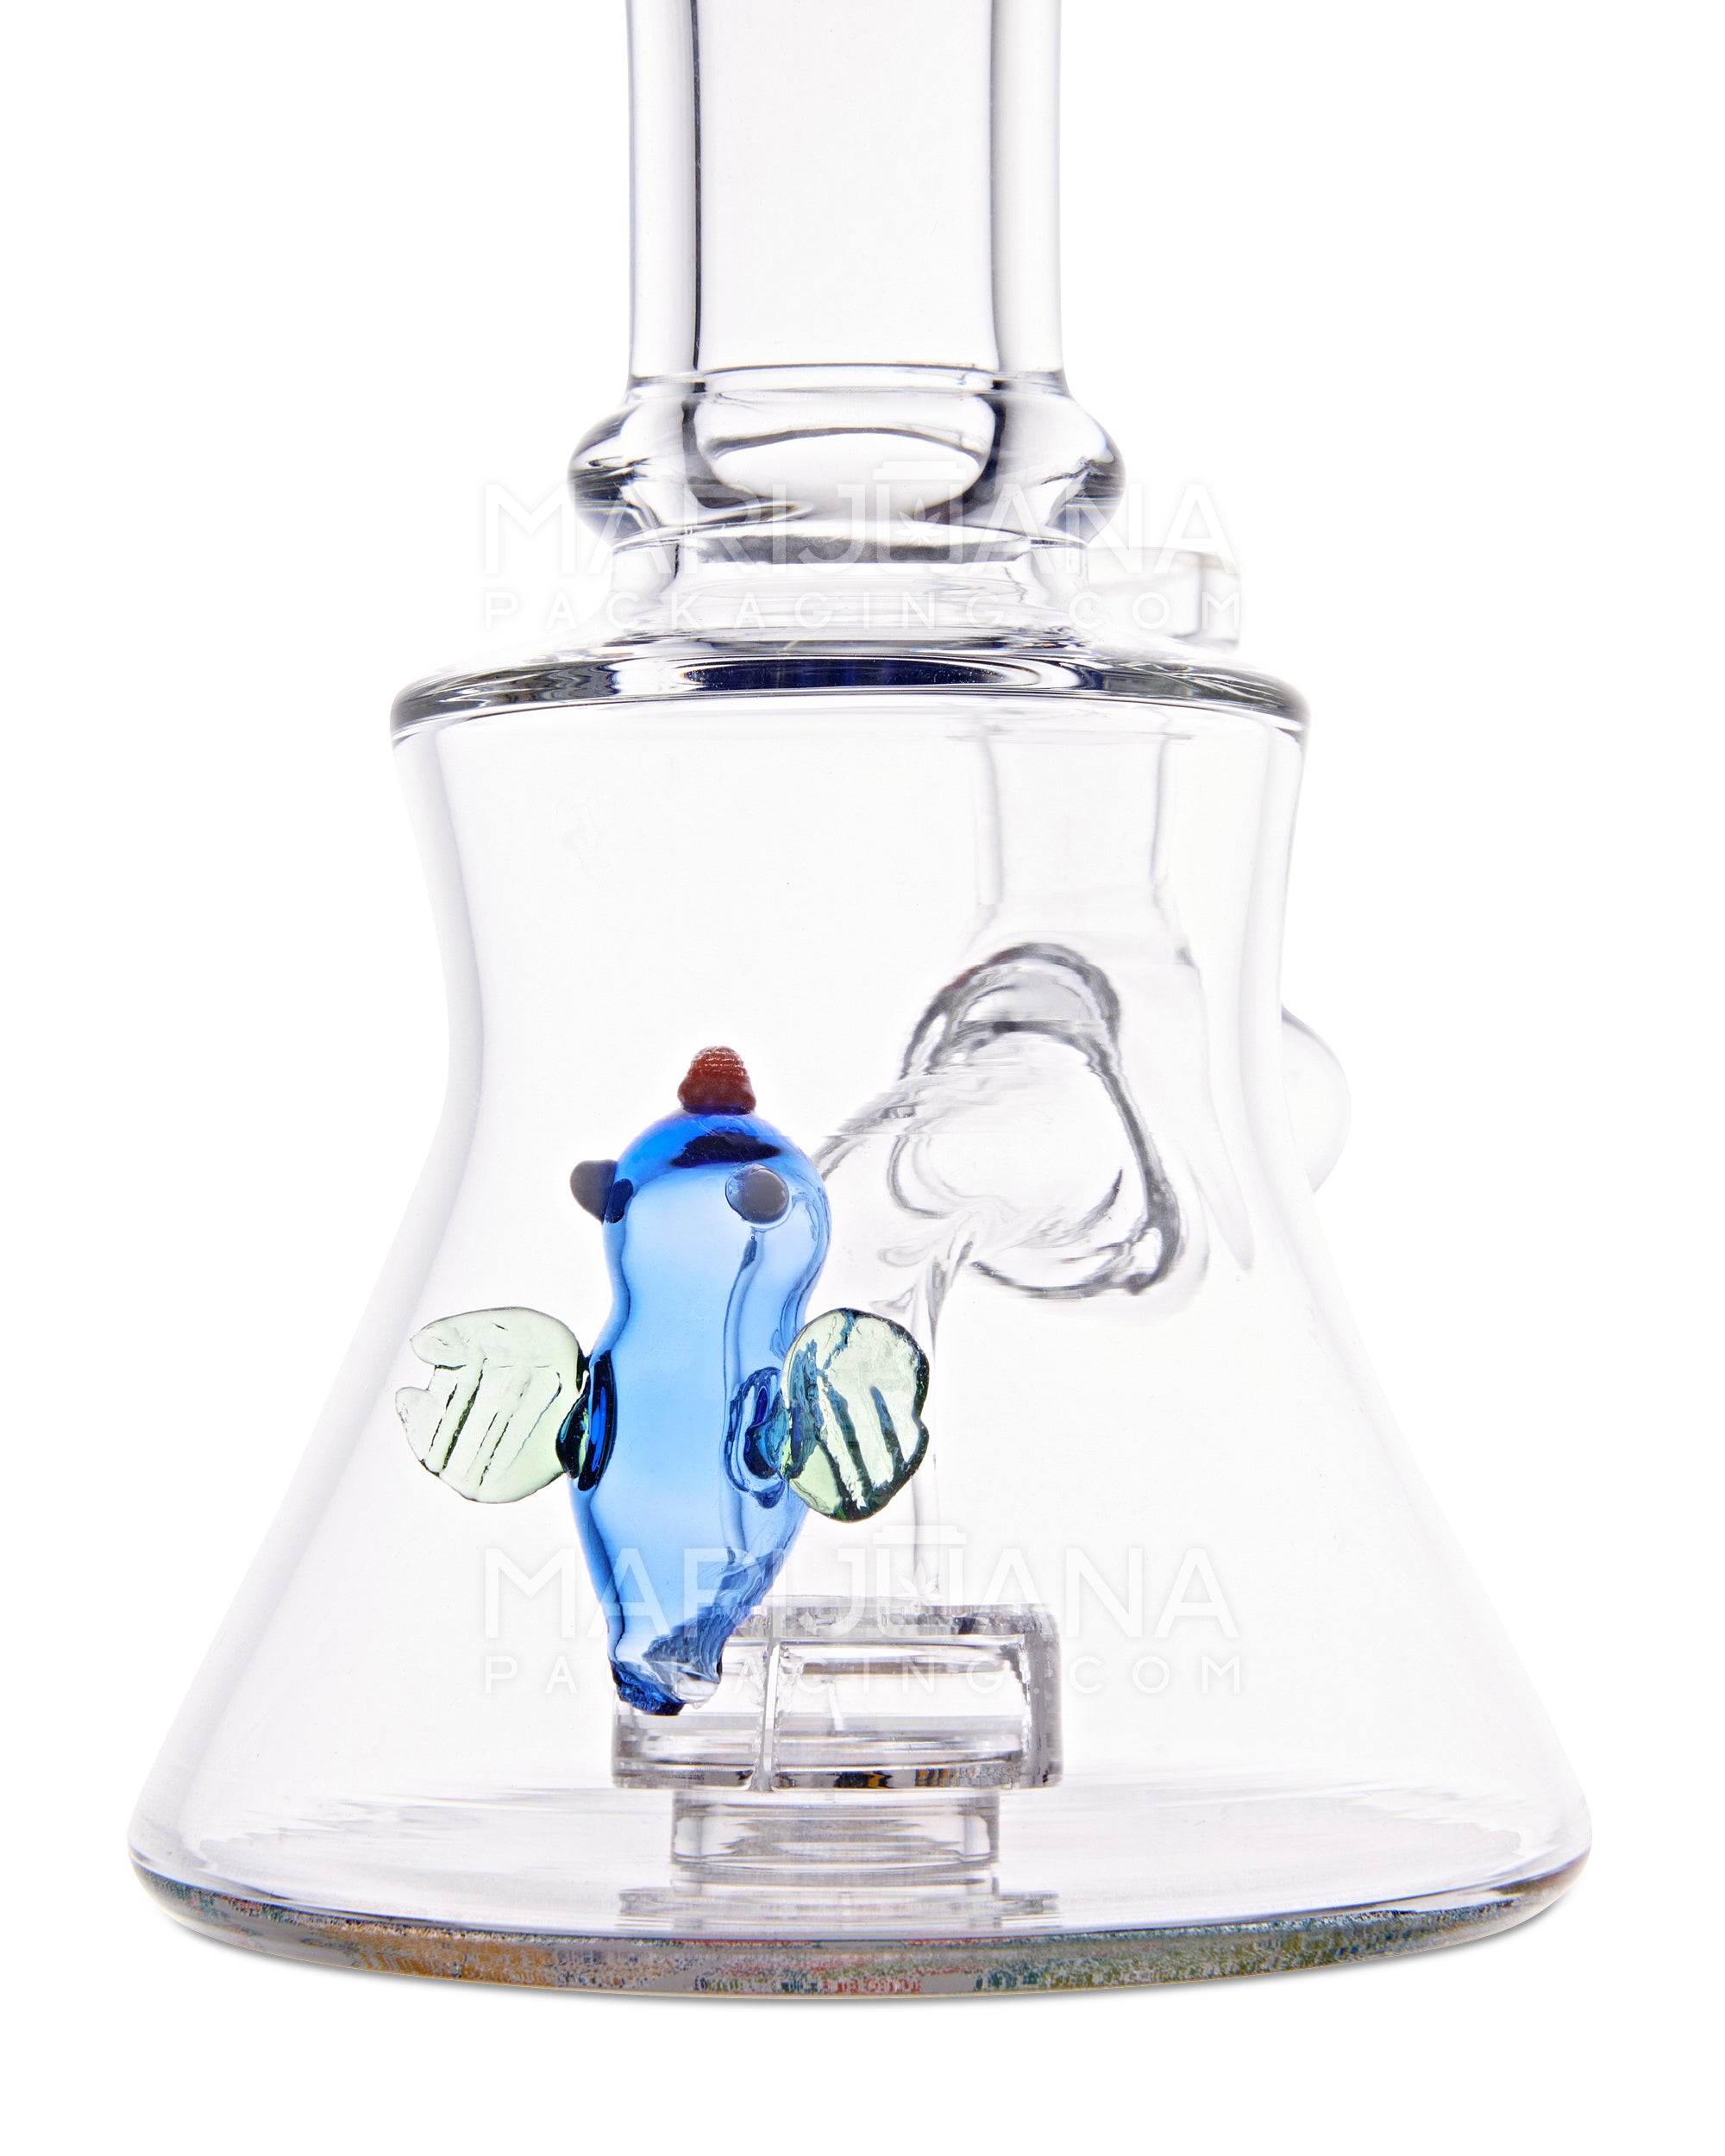 Bent Neck R&M Bee Showerhead Perc Glass Water Pipe w/ Base Decals | 7in Tall - 14mm Bowl - Assorted - 3